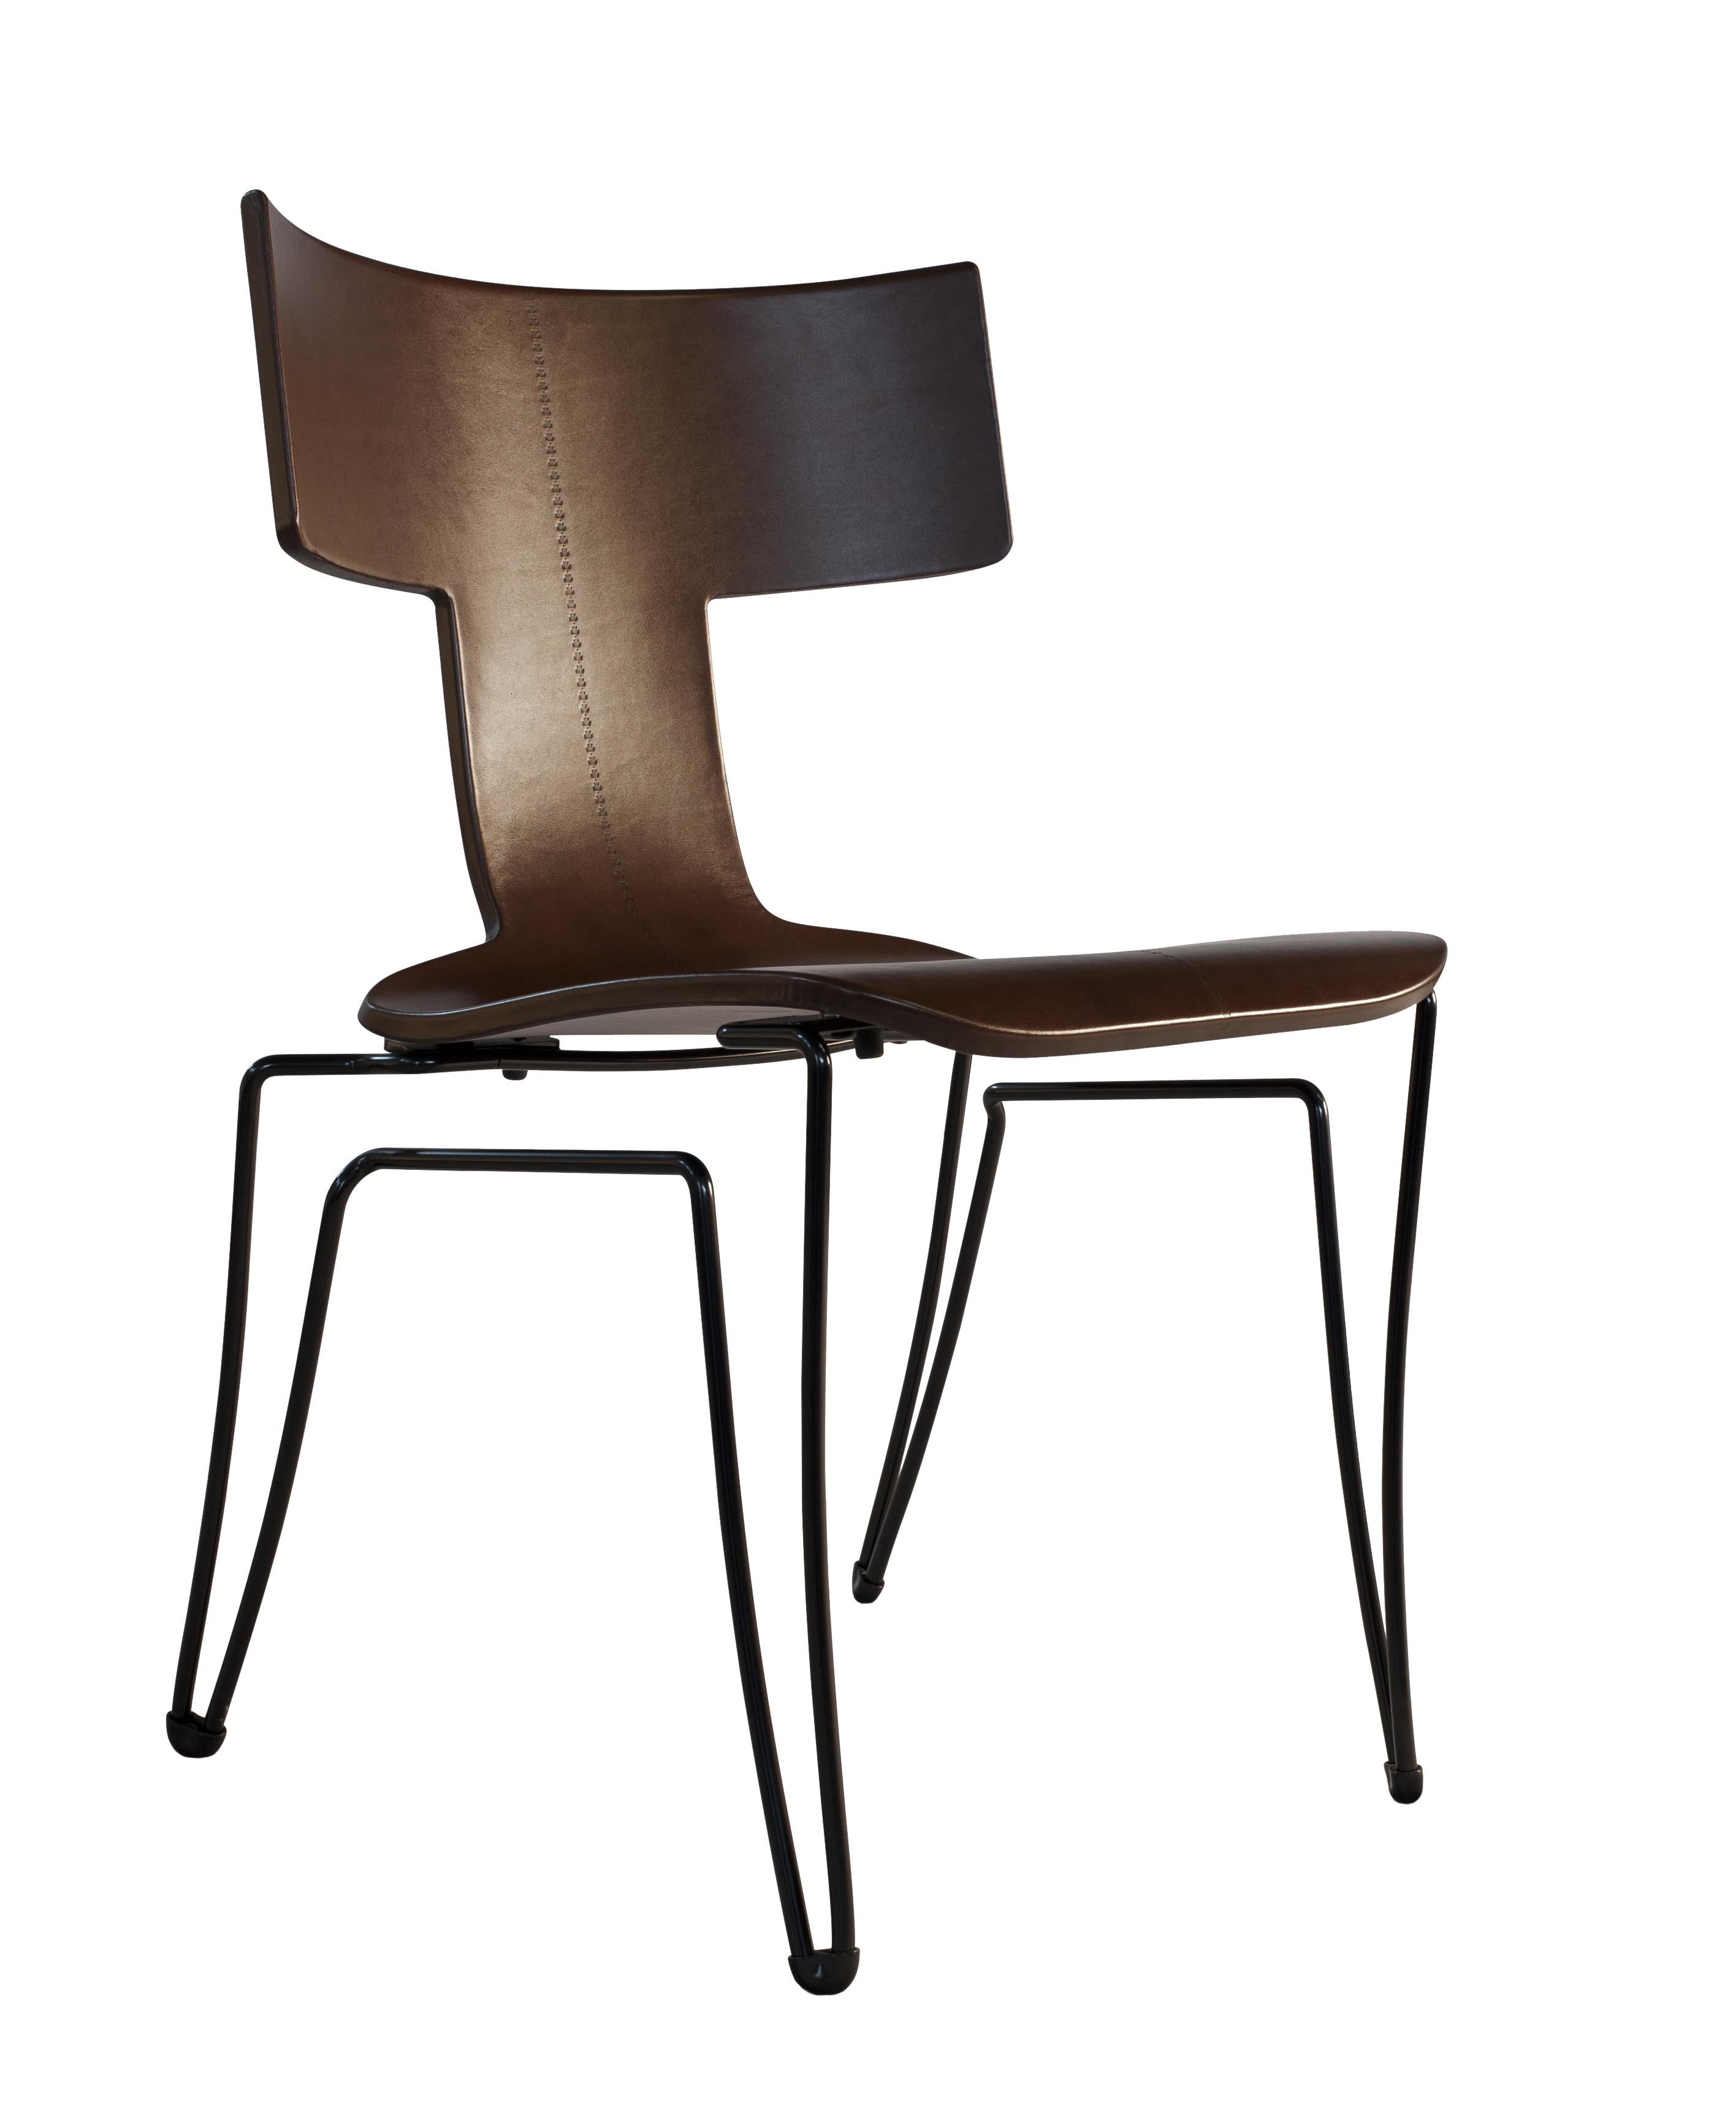 With its combination of simplicity and ingenuity, the Anziano has become one of Donghia's emblematic pieces. Chair with a molded shell of beech wood veneer available in stained, lacquer, or leather finishes. Base made of black powder coated steel.